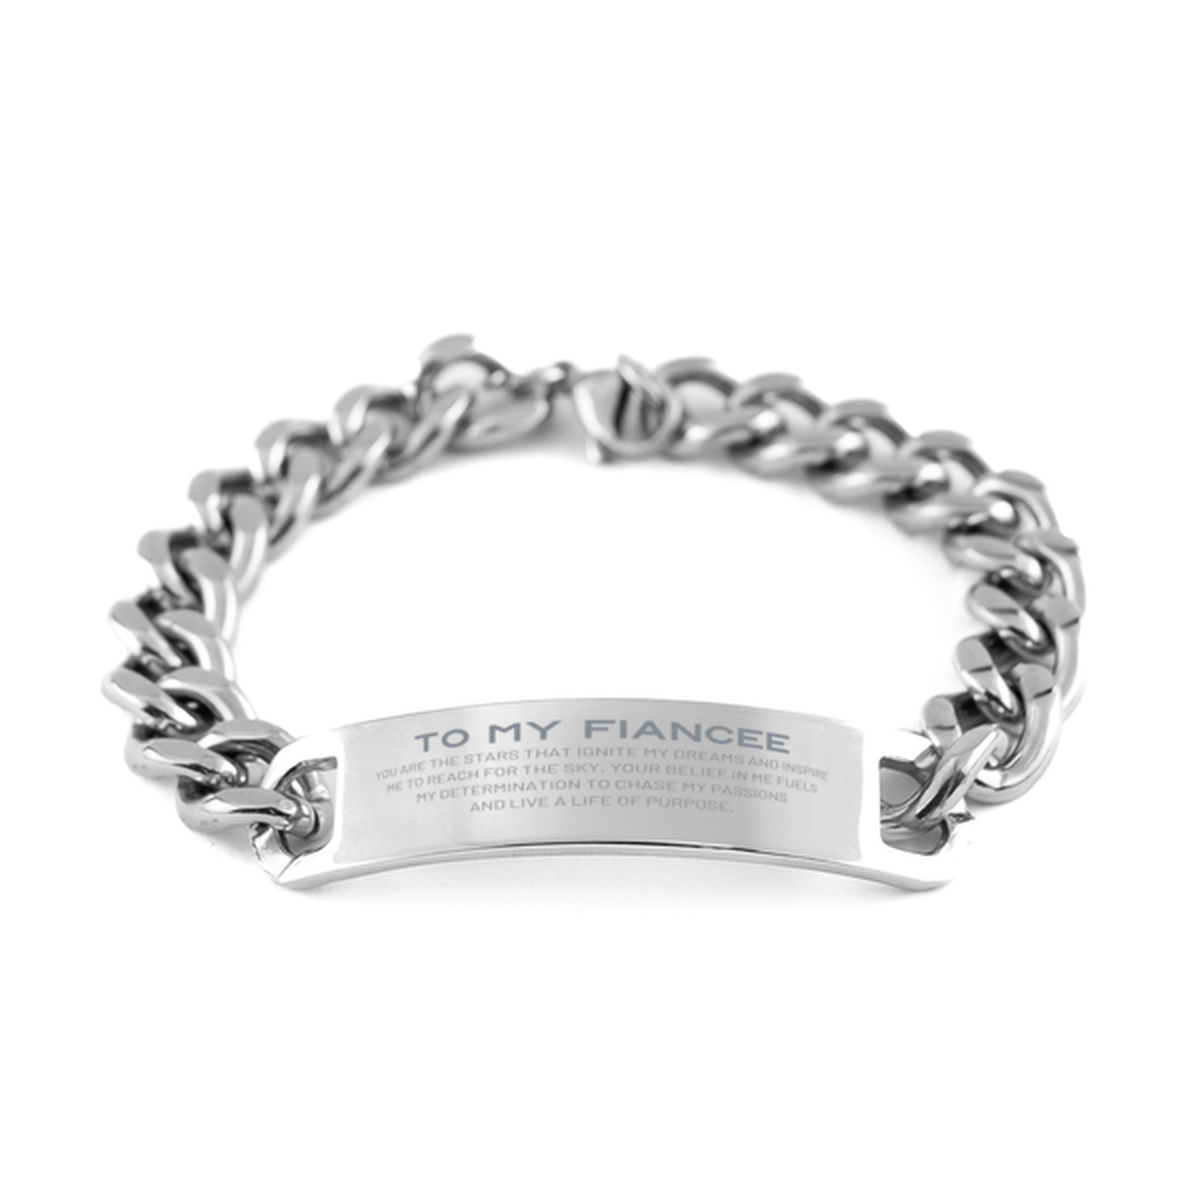 To My Fiancee Cuban Chain Stainless Steel Bracelet, You are the stars that ignite my dreams and inspire me to reach for the sky, Birthday Unique Gifts For Fiancee, Thank You Gifts For Fiancee